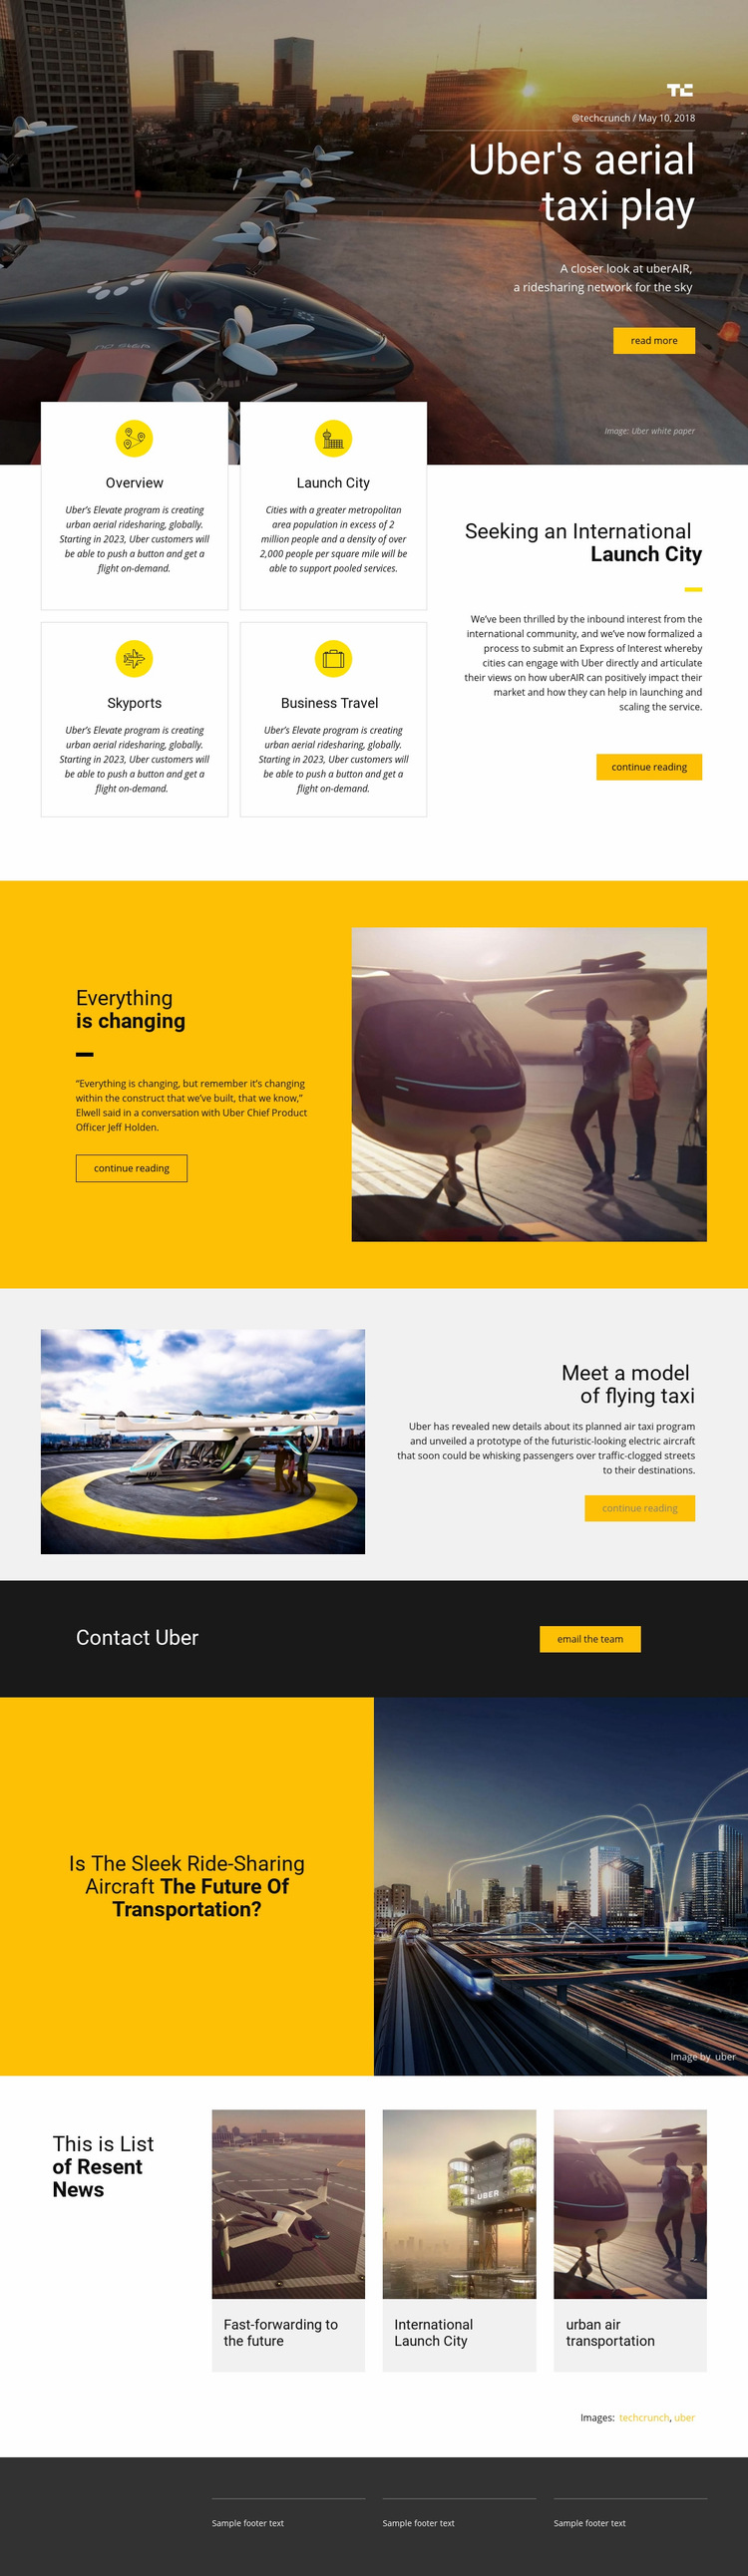 Uber's Aerial Taxi Play Web Page Design